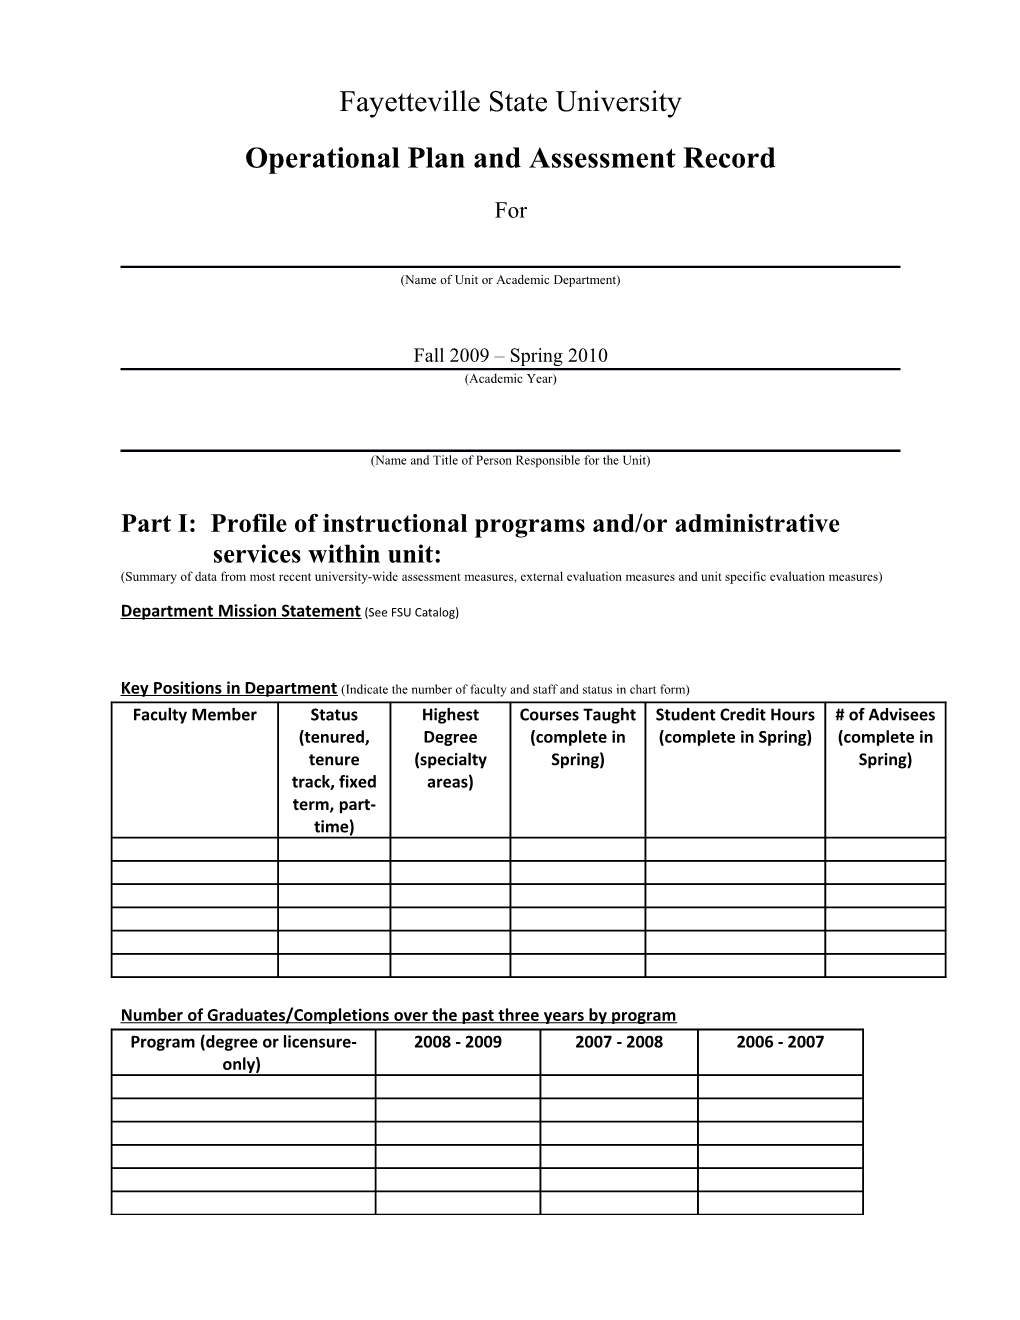 Operational Plan and Assessment Record